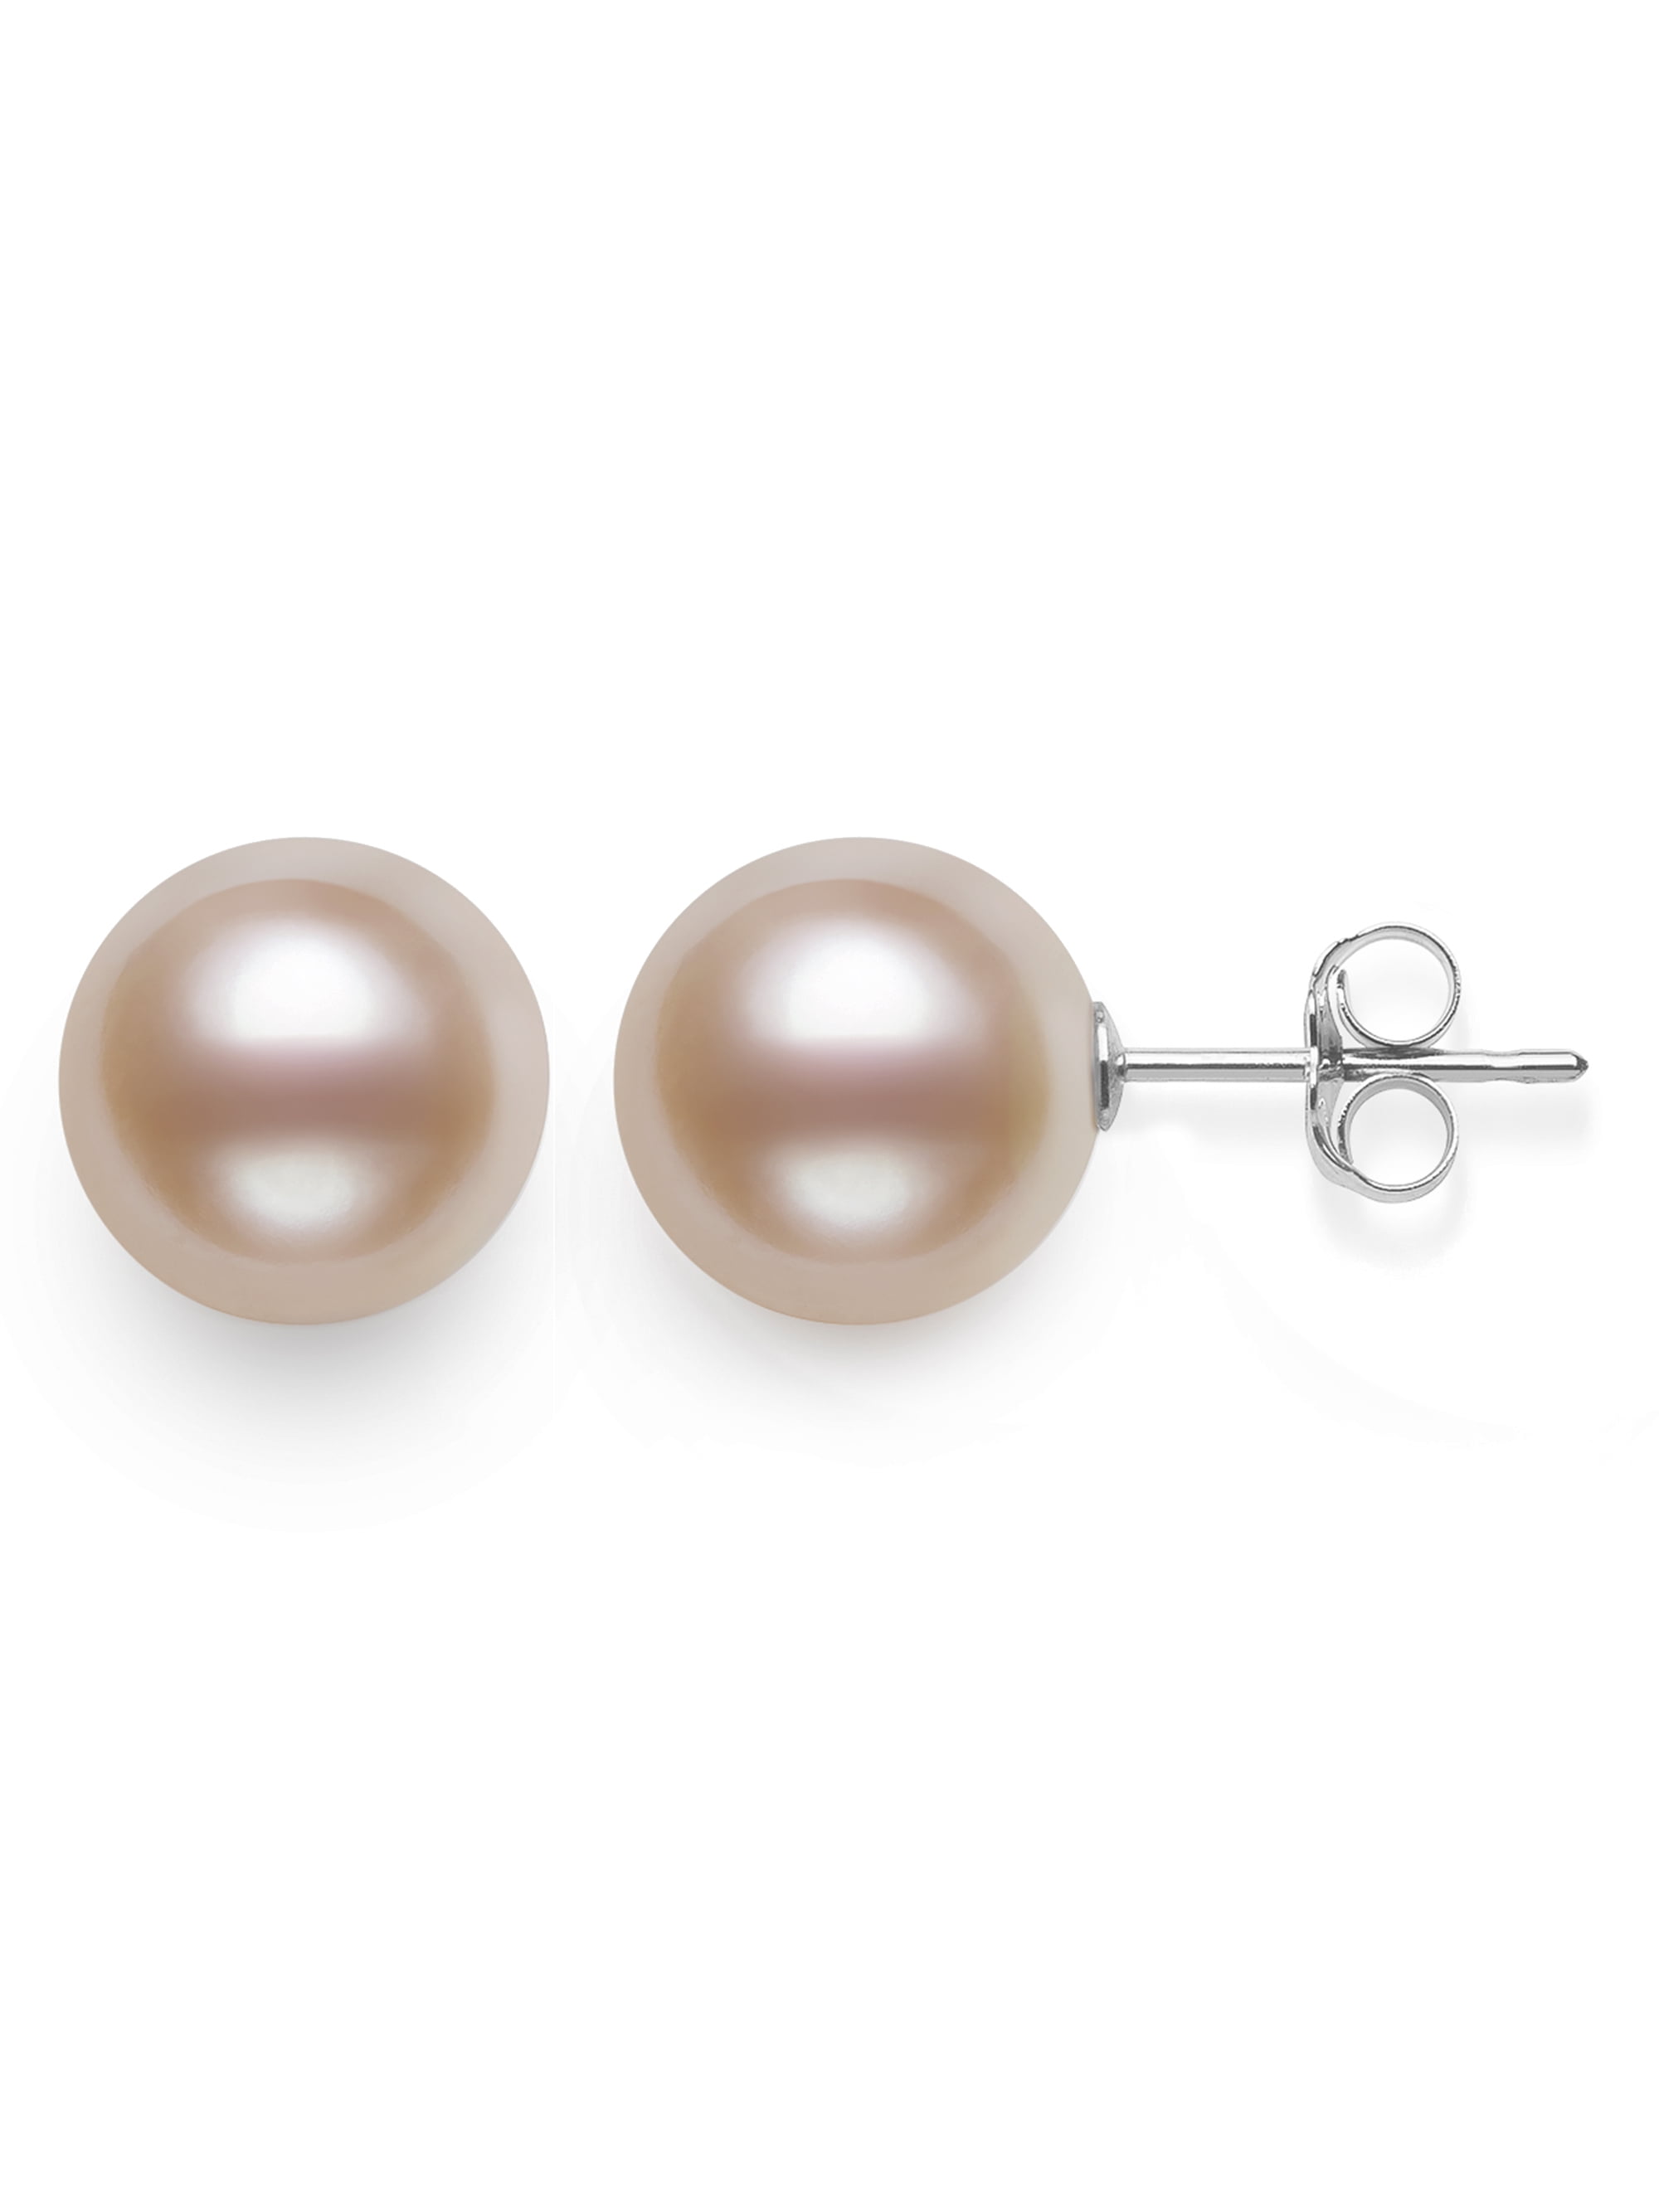 9.0-10.0 mm AAA Pink to Peach Freshwater Cultured Pearl Stud Earrings 